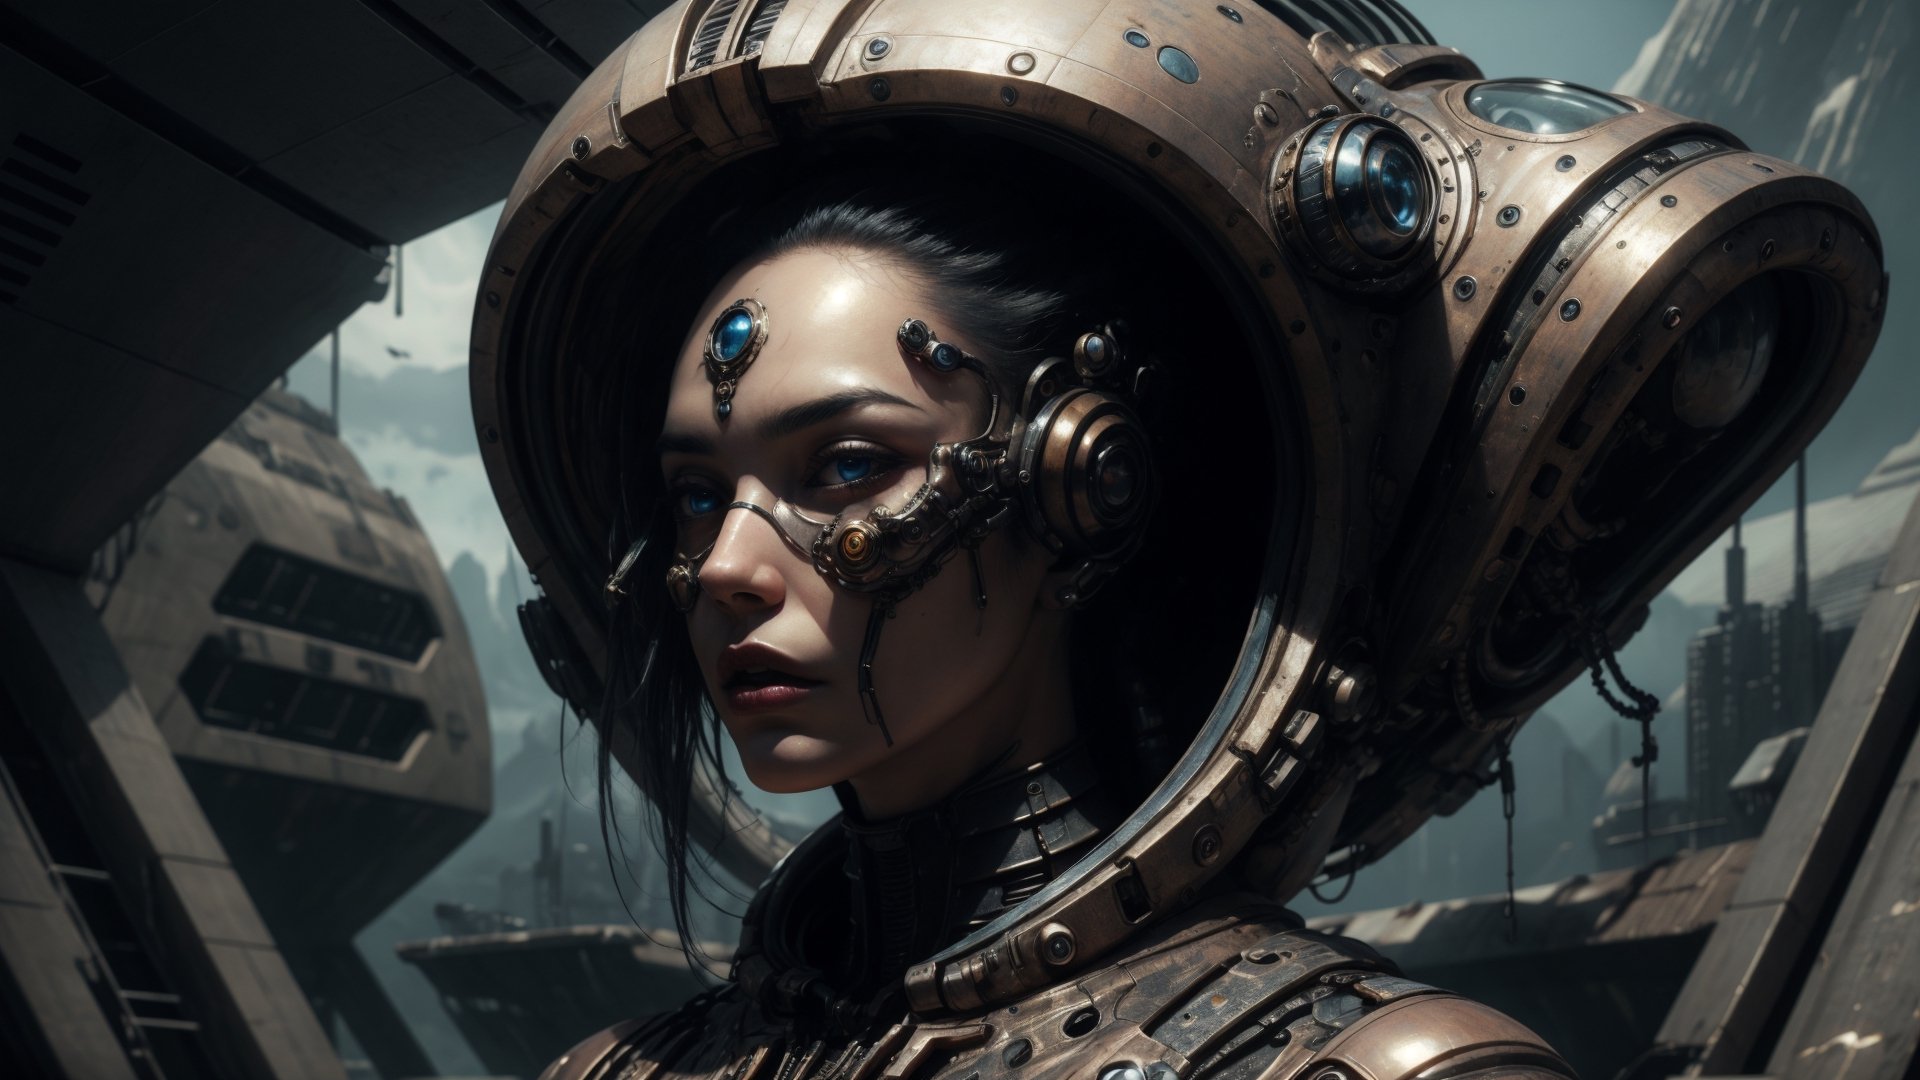 Title: Detailed Cyberpunk-Steampunk Fusion Portrait Request with Alien Landscape

Description:
Generate a detailed digital illustration featuring a young woman with specific characteristics set in a cyberpunk-steampunk fusion environment with an alien aesthetic.

Request Details:
- Subject: Illustrate a young woman with black hair and blue eyes.
- Setting: Create a cyberpunk-steampunk fusion backdrop with a distinctly alien appearance.
- Pose: Depict her in a dynamic, full-body adventure pose.
- Attire: Clothe her in an astronaut suit.
- Background: Design the background with surreal alien structures and an otherworldly landscape.
- Expression: Show her with a surprised expression.
- Style: Apply high contrast and soft shading to enhance the visual appeal.

Please place particular emphasis on making the environment look genuinely alien, with unique and imaginative alien elements. The final artwork should be of high quality, highlighting intricate details and artistry while immersing the viewer in this captivating and otherworldly fusion.
